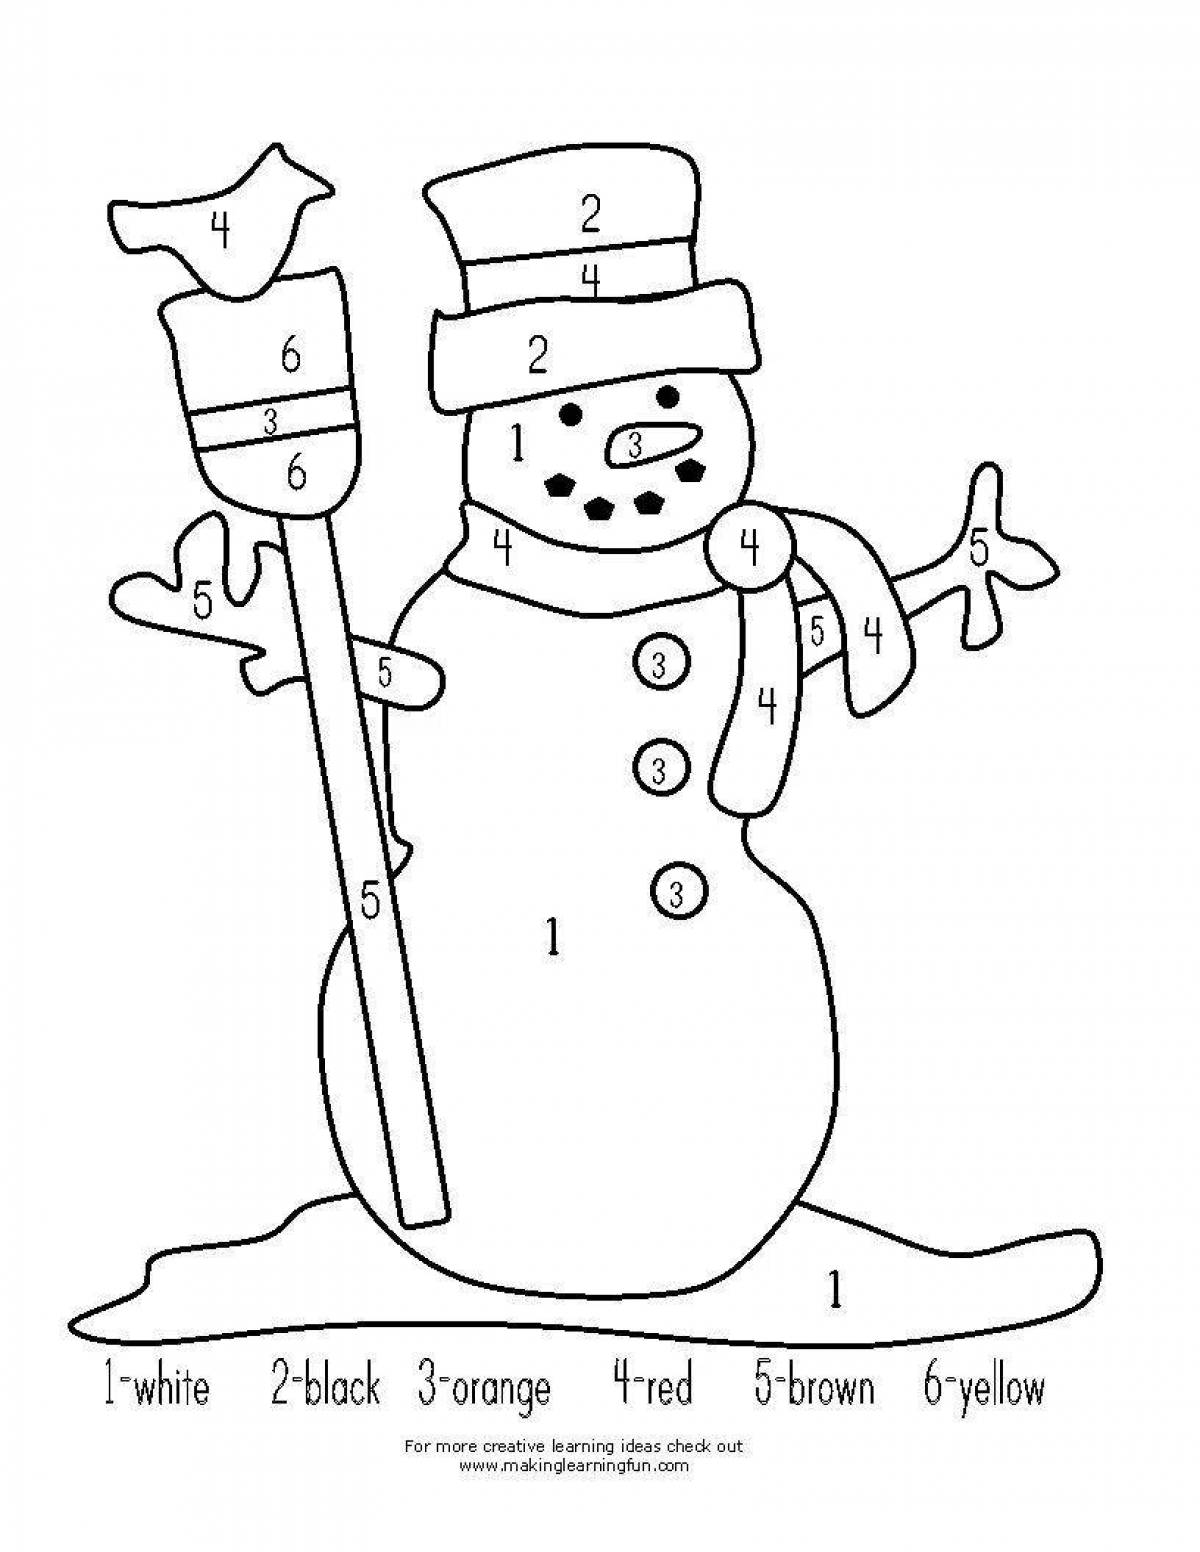 Snowman by numbers #9